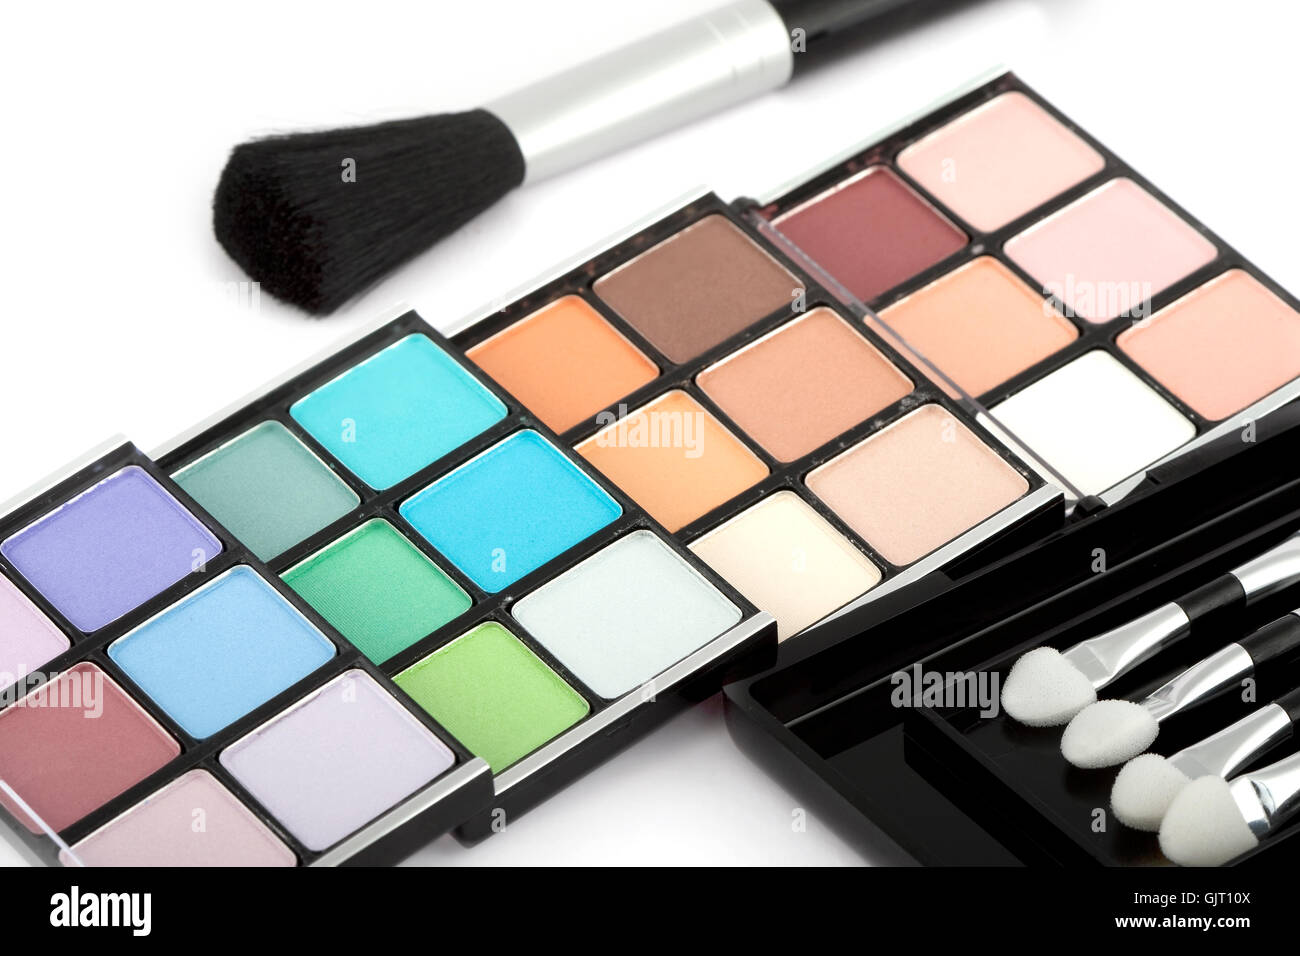 cosmetics for making up the eyes Stock Photo